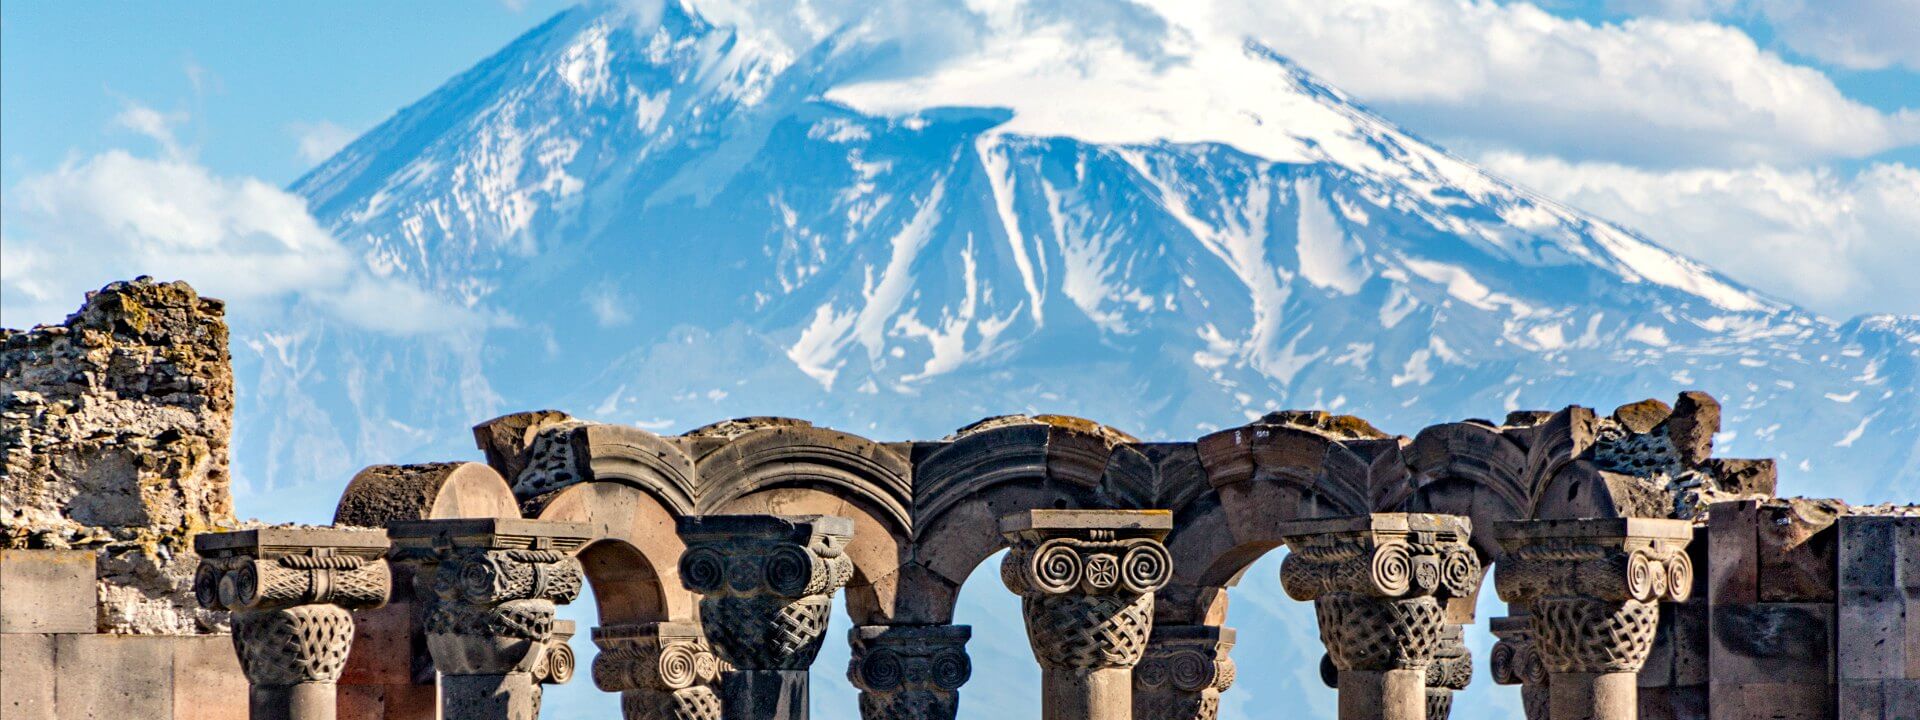 Alternative Europe holidays - Armenia - ruins in front of snow-capped mountain